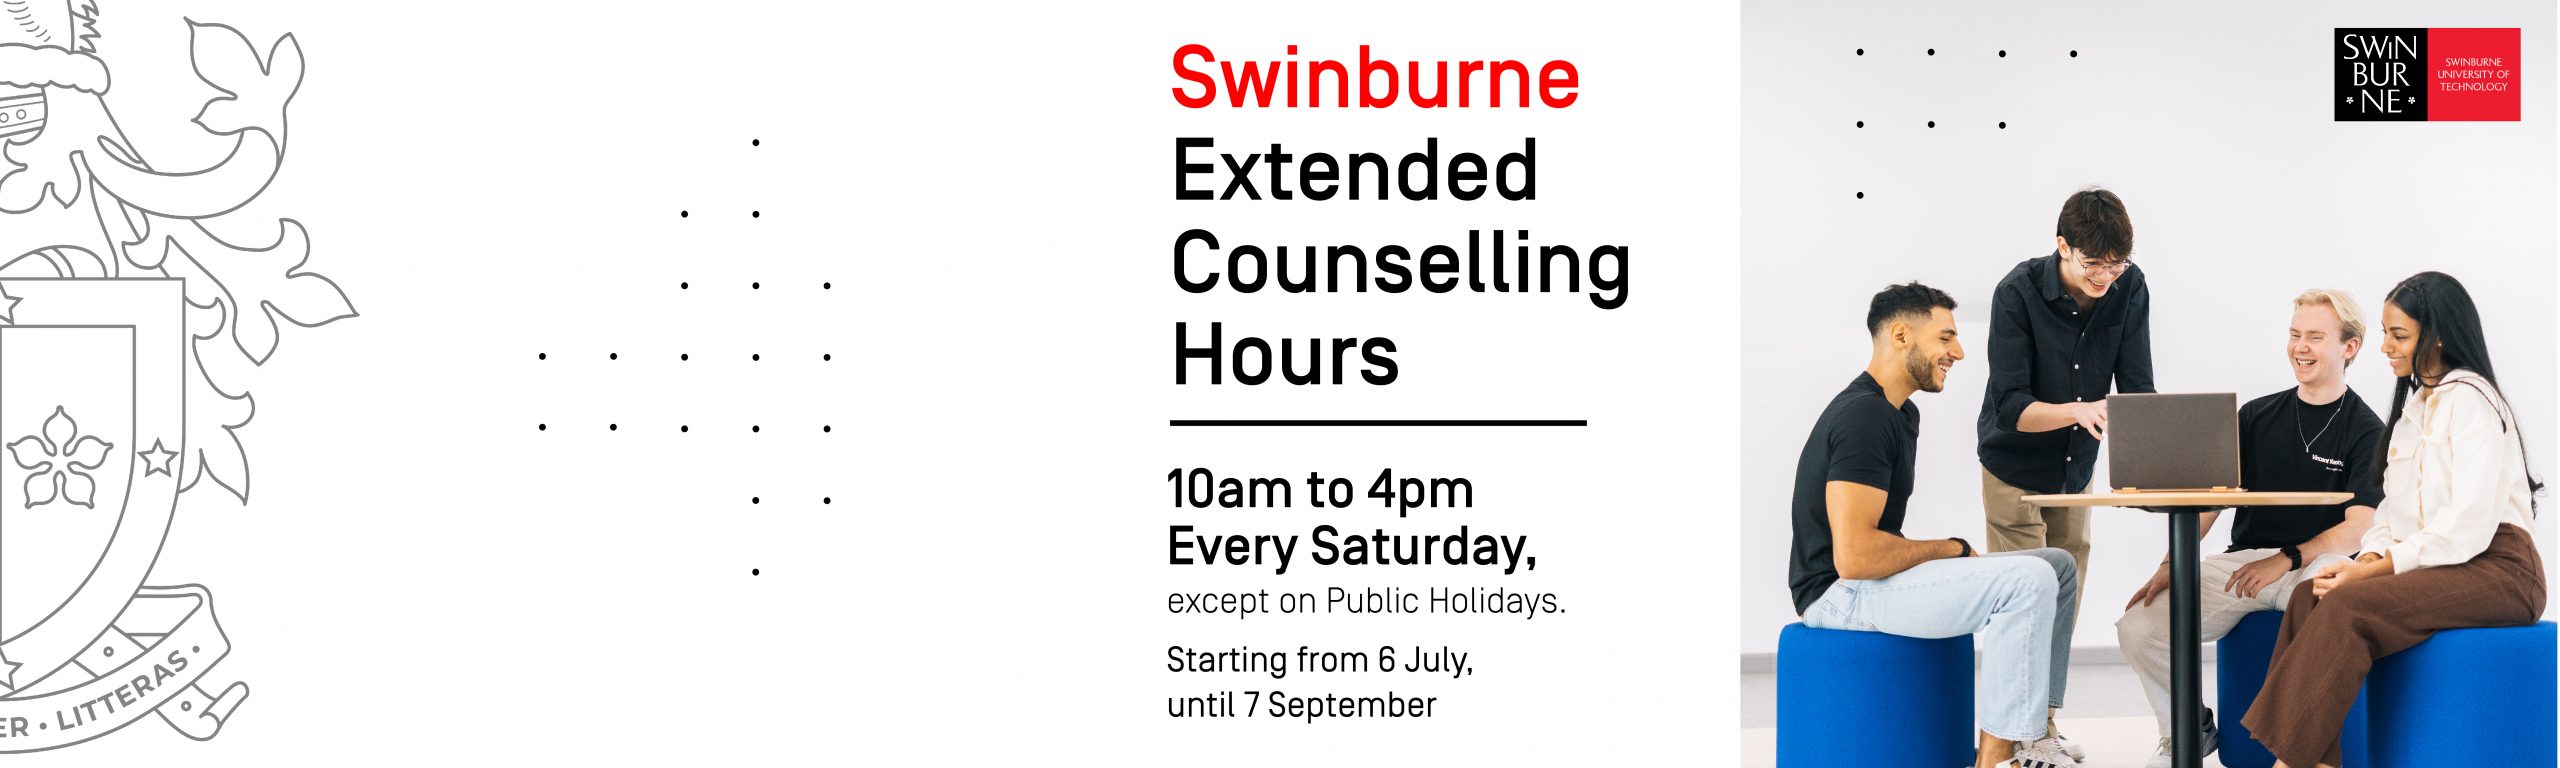 Swinburne Extended Counselling Hours